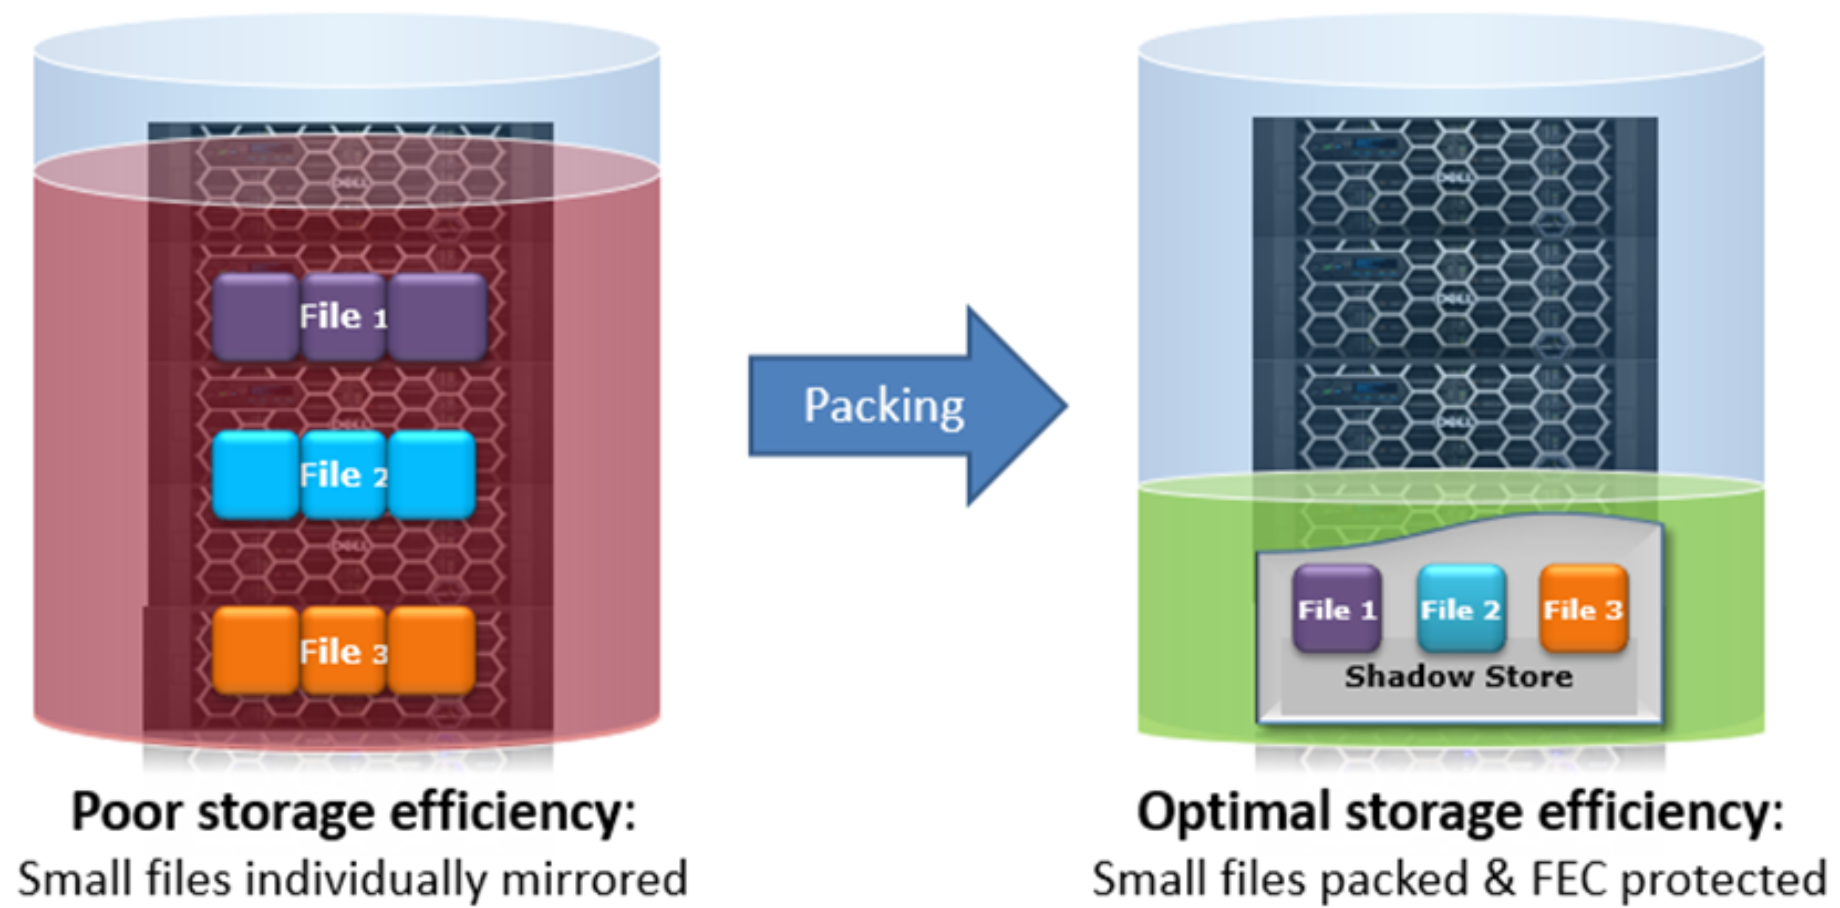 Graphic showing the containerization of small files into OneFS shadow stores. These shadow stores are then parity protected, rather than mirrored, and provide greater storage efficiency. 